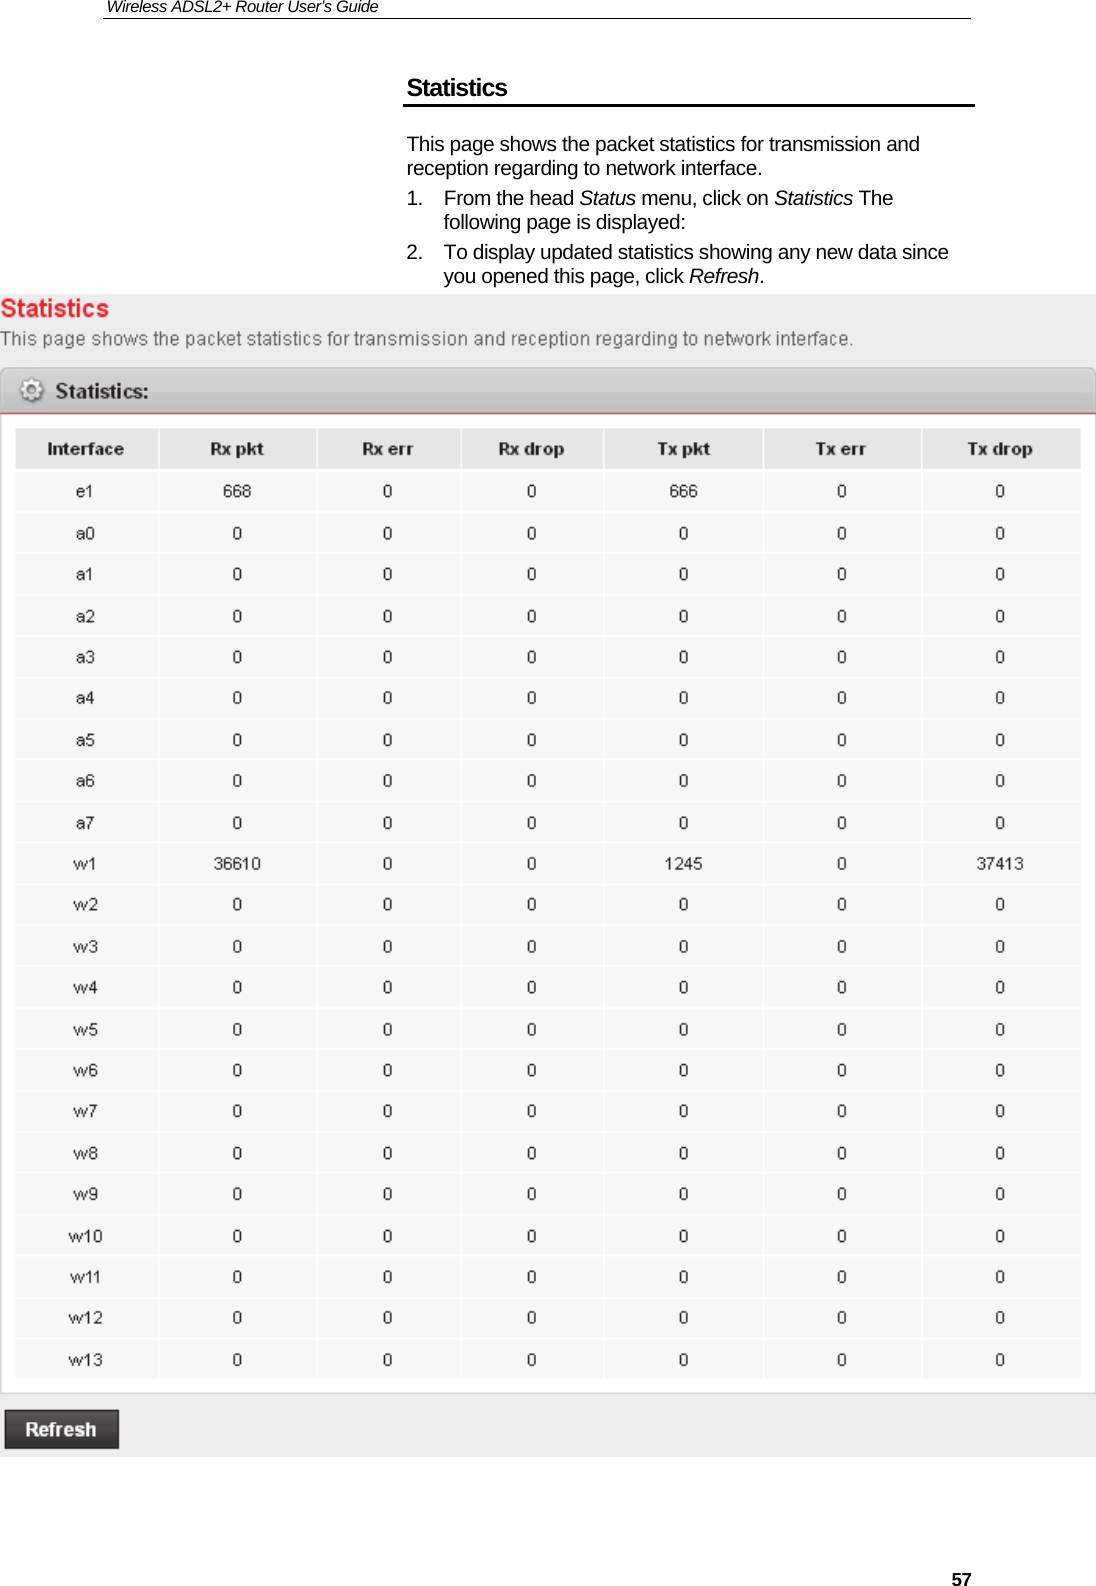 Wireless ADSL2+ Router User’s Guide     57Statistics This page shows the packet statistics for transmission and reception regarding to network interface. 1. From the head Status menu, click on Statistics The following page is displayed: 2.  To display updated statistics showing any new data since you opened this page, click Refresh.    